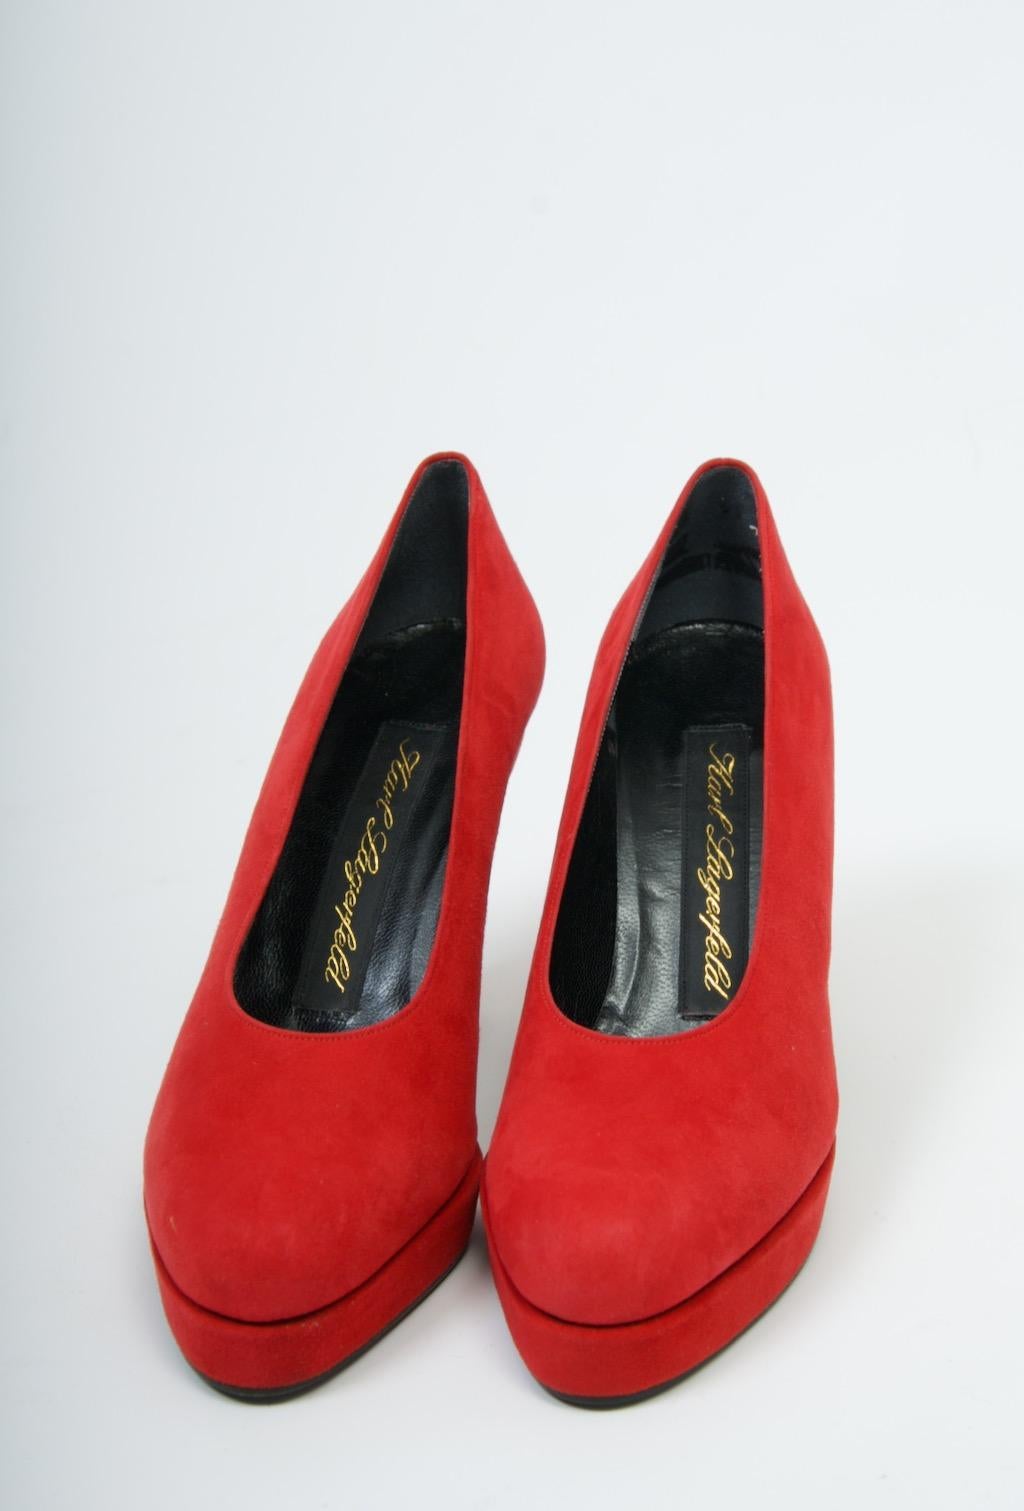 Karl Lagerfeld Red Suede Platform Pumps In Excellent Condition For Sale In Alford, MA